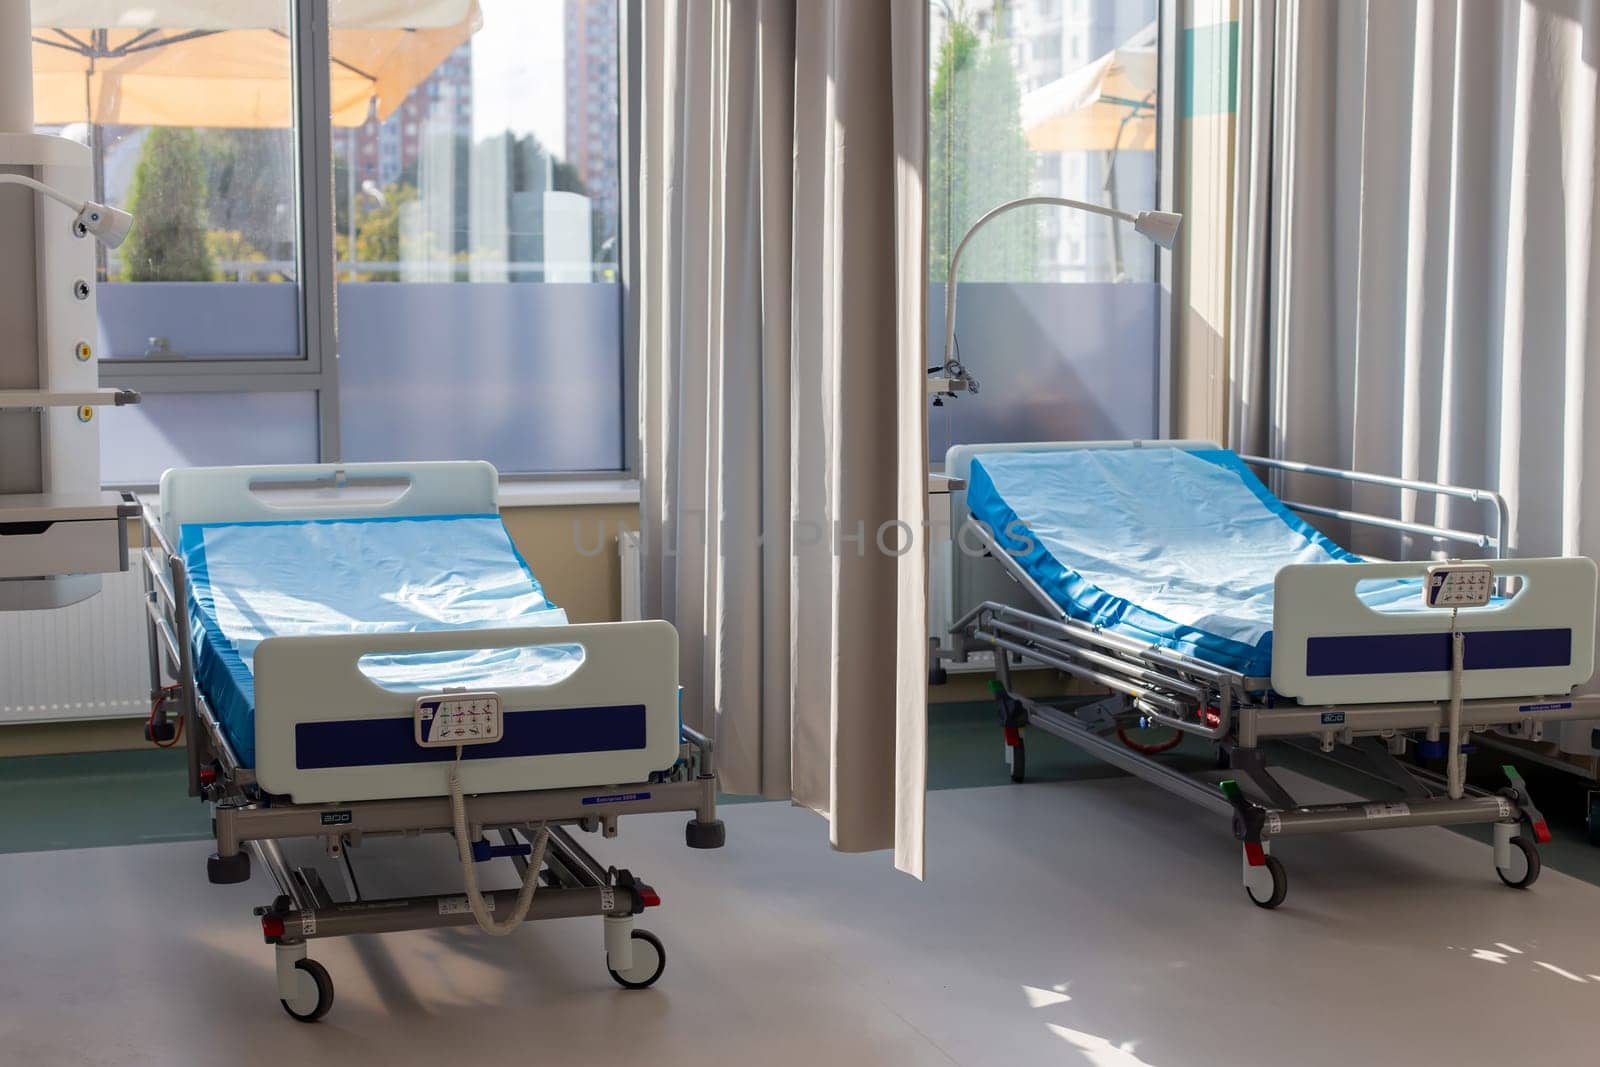 Moscow, Moscow region, Russia - 03.09.2023:Brightly lit hospital room with multiple beds and medical equipment